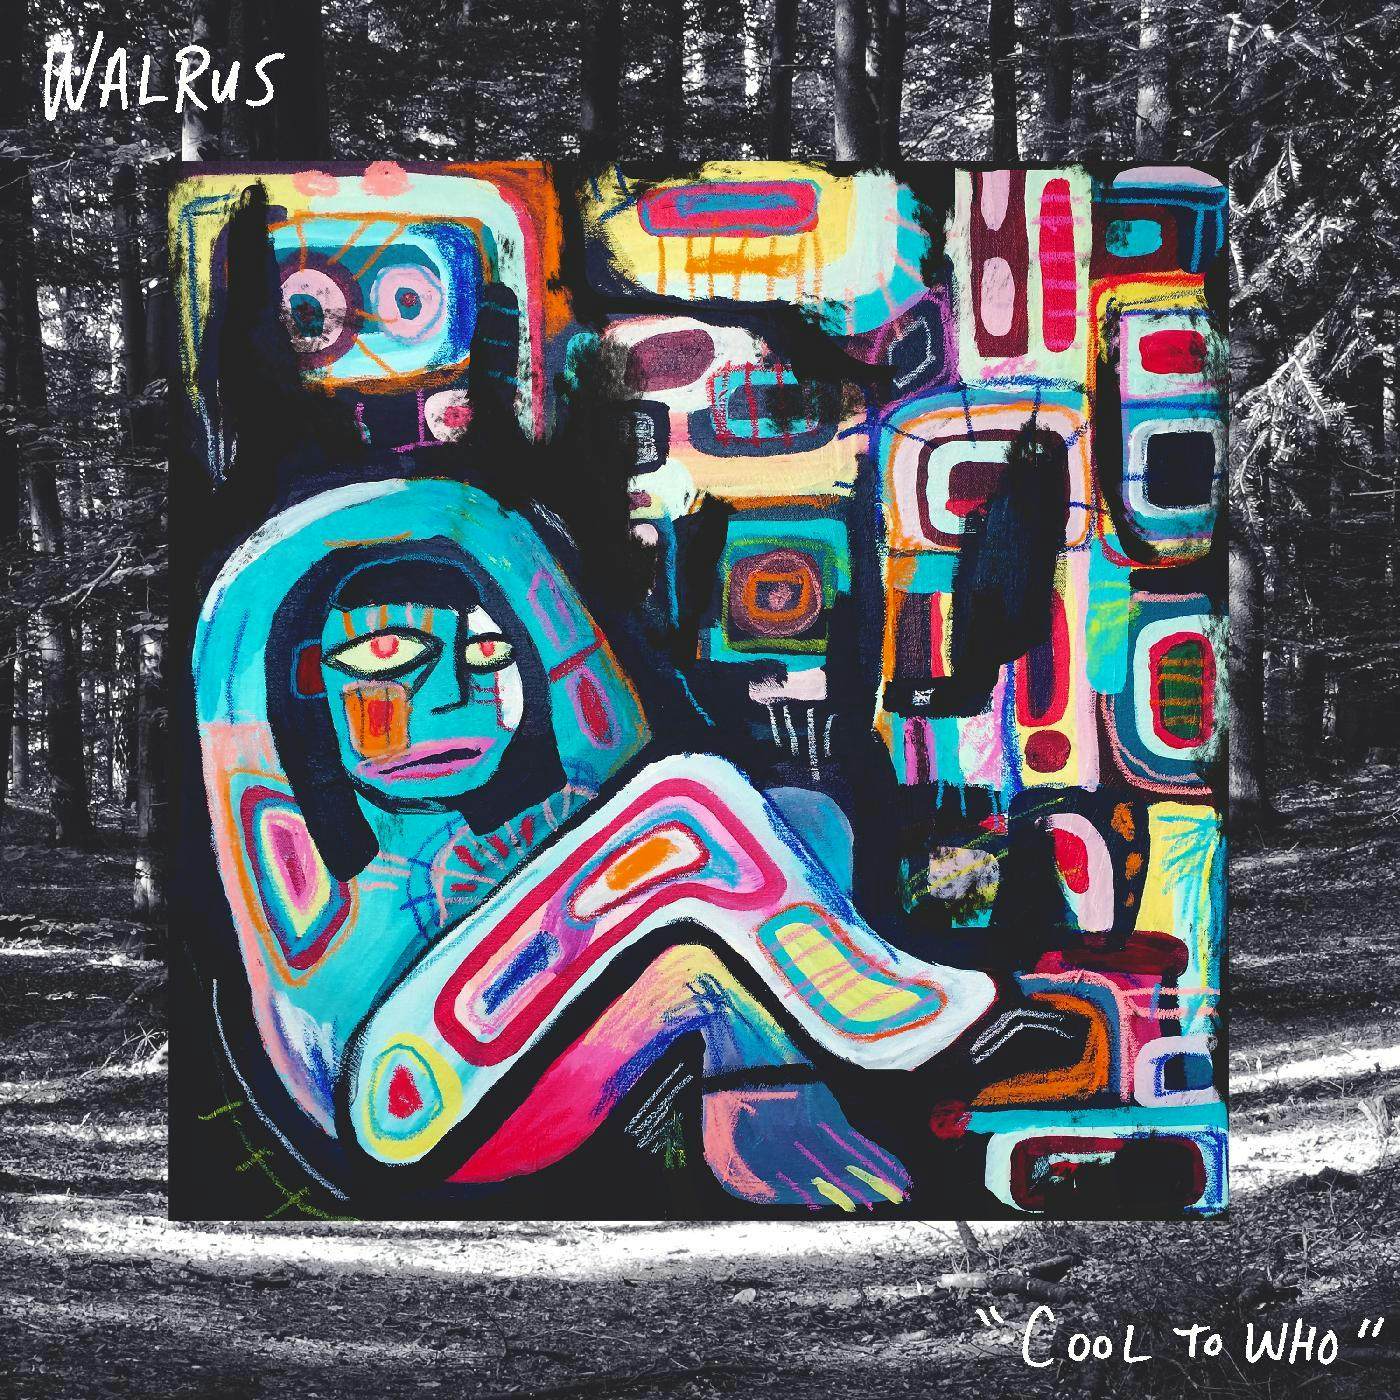 Walrus COOL TO WHO CD